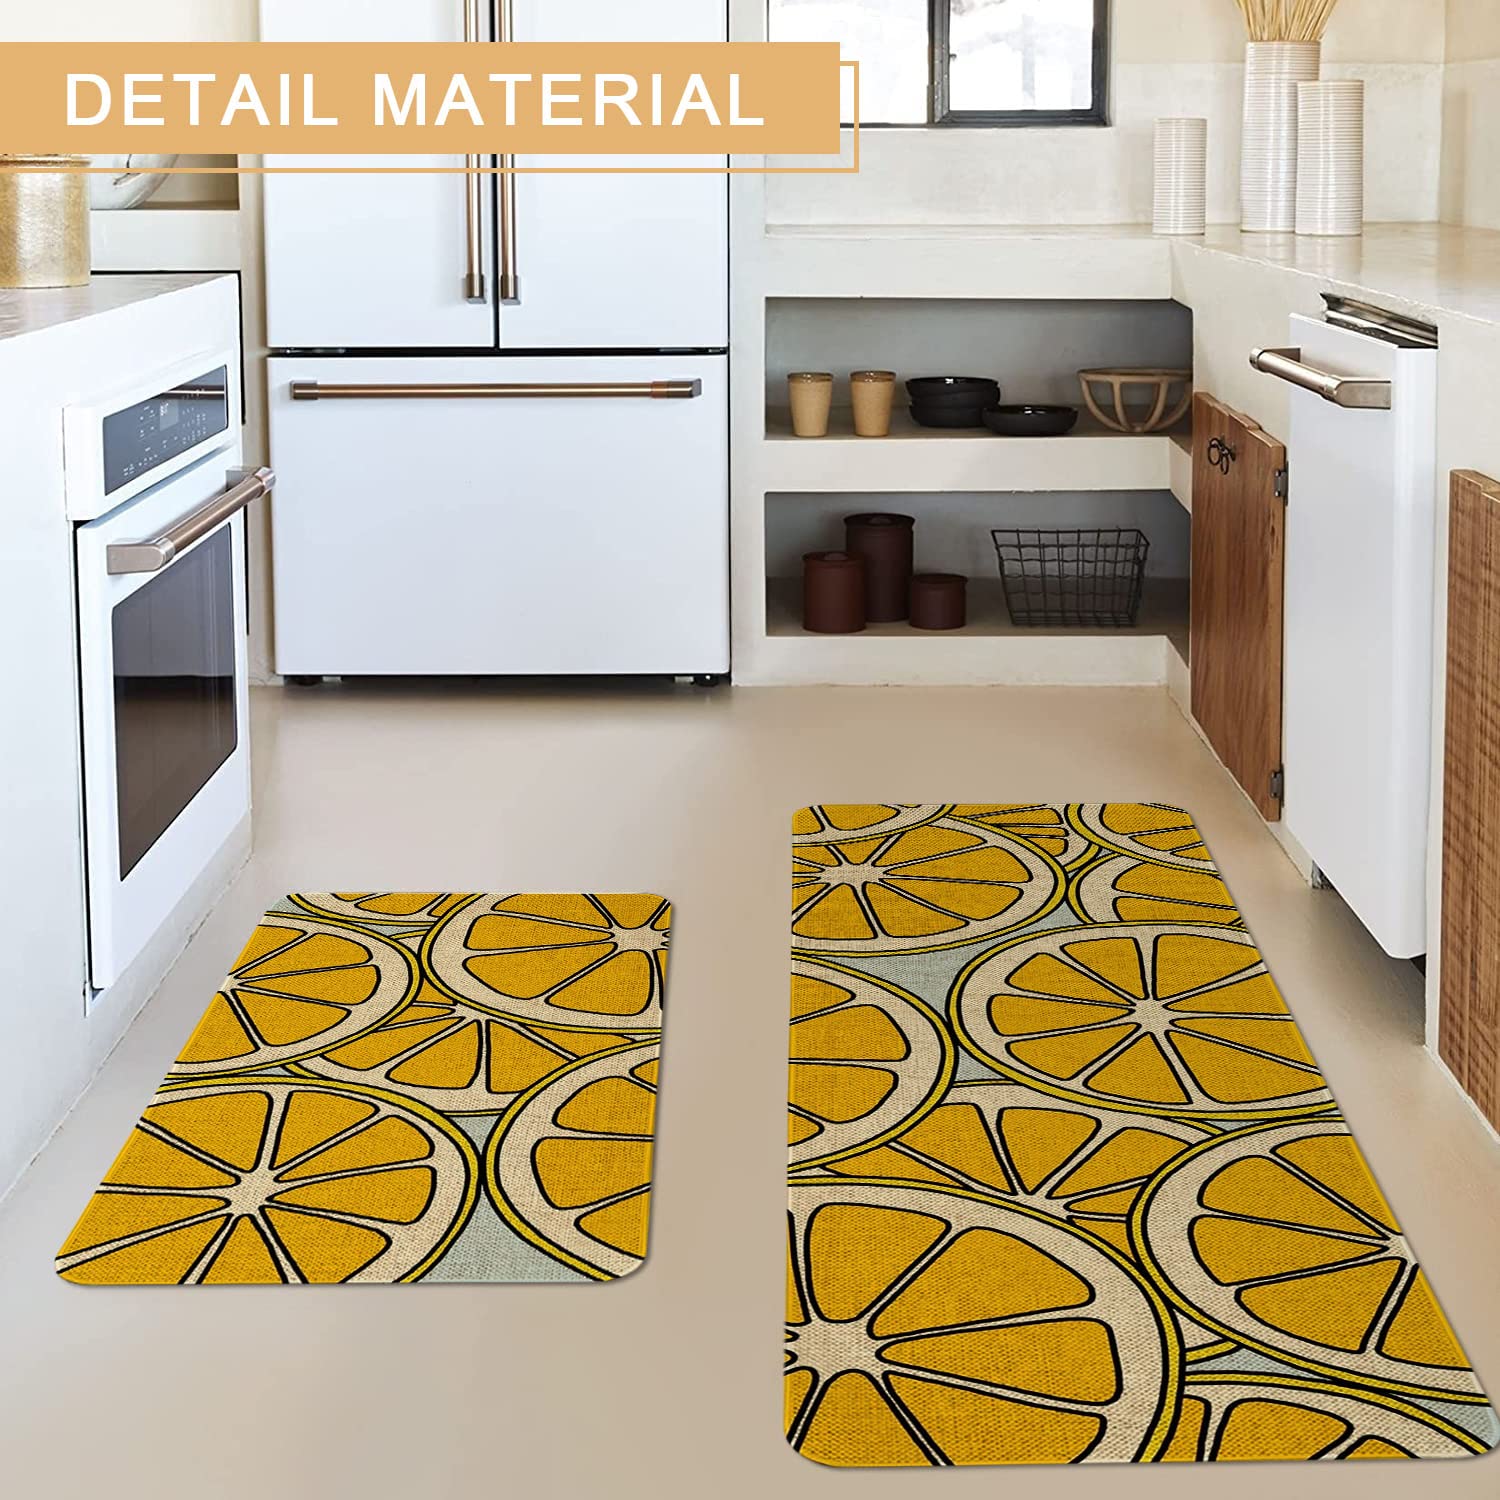 Mloabuc® Yellow Lemon Decorative Kitchen Mats Set of 2, Anti Fatigue Waterproof Stain Resistant Floor Rug Non Slip Cushioned Floor Mat - 17x29 and 17x47 Inch